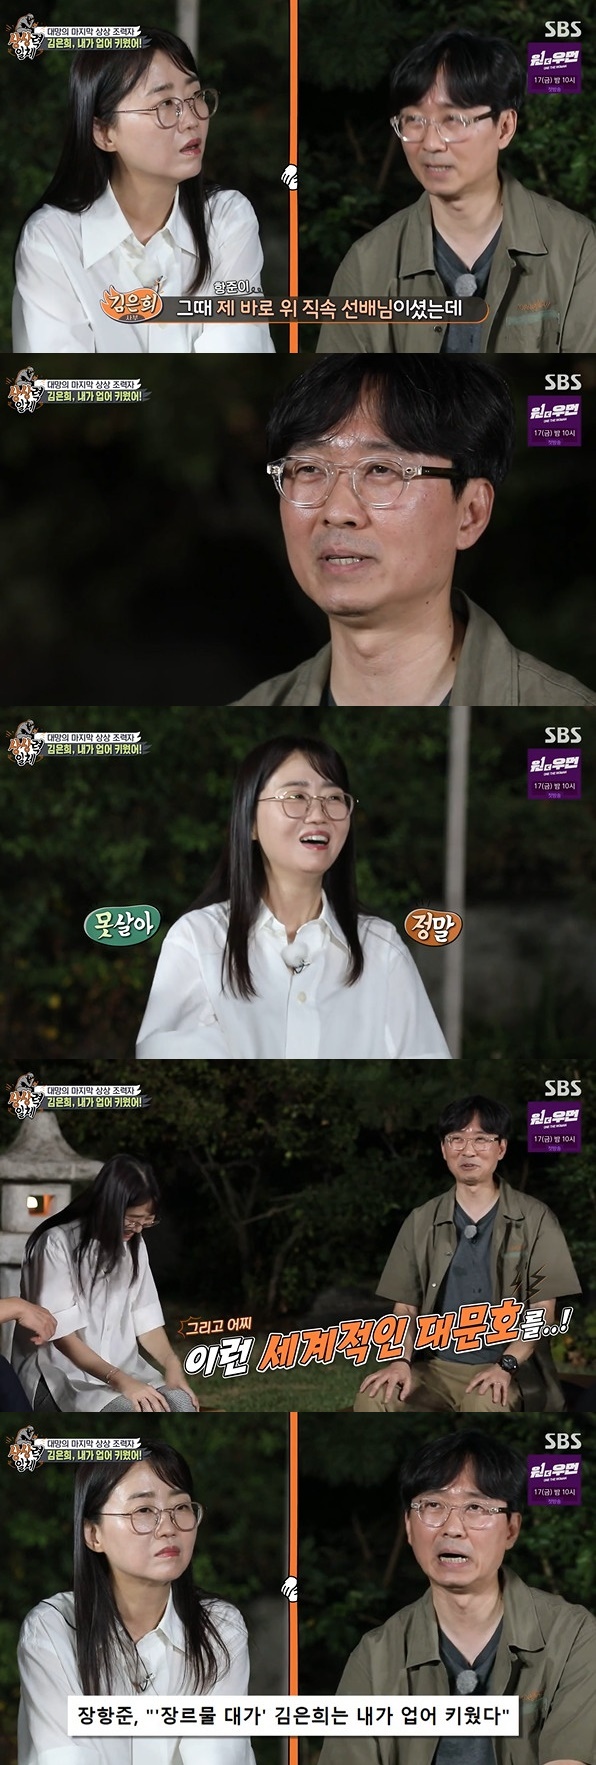 Seoul = = Kim Eun-hee and director Jang Hang-jun showed off their professional side of the creator following the team-up Chemistry.On SBS All The Butlers broadcasted on the afternoon of the 12th, Kim Eun-hee, the master of the mystery genre, appeared as a master and spent a day with the members.Seo In-sun Inspection, which helped Kim Eun-hees coverage, appeared on the day.Kim Eun-hee has covered a lot of Seo In-sun Inspection for the Inspection character played by Uhm Ji-won in the drama Signs.He said he had often contacted and received contacts when seeking advice related to the law.The Signs mainly deal with forensics, but there are many scenes of investigations (by Kim Eun-hee), and I also tried to improve the completeness of the terms and document procedures, said Seo Inspection. There is a scene where Mr. Uhm Ji-won executes the arrest warrant, which also provided us with the actual documents we write.In addition, Seo Inspection said, I drank with Kim Eun-hee, but when I saw Signal, I seemed to be drunk at the drinking place and I caught it. In Signal, Kim Hye-soo said that he was referring to the scene of interviewing based on DNA on glasses.Kim Eun-hee wrote, So how hard do I live?Kim said, It is the statute of limitations that I talked to the Inspection the most at the time of Signal. If the prosecution does not prosecute even if the prosecution is 10 minutes or 5 minutes away, it will not be punished.I asked because it was so unfair, he recalled.Seo Inspection said, Kim Eun-hee has been very careful about each term, Kim said.Seo Inspection said that the inspection setting that shoots the investigation is unrealistic, saying, If the completion is low, it can not be immersed.I think that part is highlighted because the level of peoples demands is high, although it is sometimes upset because it is drawn like an incarnation of corruption or evil (in the investigation), he said.Most of the prosecution members are working hard in silence, he said. I think we should try harder and work harder.The third assistant appeared as Kim Eun-hee writer Husband and film director Jang Hang-jun.Kim Eun-hee said of Jang Hang-jun: Its the first shooter of my life, I started working for the Entertainment Bureau and I was a senior right above me.He taught me scenarios and society. Jang Hang-jun said, I told you about political, economic and cultural worlds other than society. Jang Hang-jun responded pleasantly to the words Kim Eun-hee was raised and I do not think it was a ridiculous thing to raise the World gate and to some extent it contributed.Kim Eun-hee turned his head to I am embarrassed and showed a special couple Chemistry.Jang Hang-jun said, Kim Eun-hee won the 2016 Baeksang Arts Grand Prize for Signal.In the award testimony, he said, I am grateful to director Jang Hang-jun who made me stand here who does not know anything. He made the scene into a laughing sea with a message full of self-love.Kim was asked if he had the advice of director Chang in the hit Kingdom and said, I did not have any monitors at all.Director Jang said, The script of others does not come into my eyes, but Kim refuted,  (the couple) are not others.In addition, Chang said, I talked about vampires in the Joseon Dynasty, and Kim Eun-hee wrote a fine head. He completed his Tikitaka Chemistry, claiming his shareholding.Finally, the assistants of Kim Eun-hee Jang-jun and Kim Eun-hee writers reviewed the script for the adaptation of the traditional fairy tales written by the members of All The Butlers.They carefully judged the completeness of the script and revealed the professional aspect.